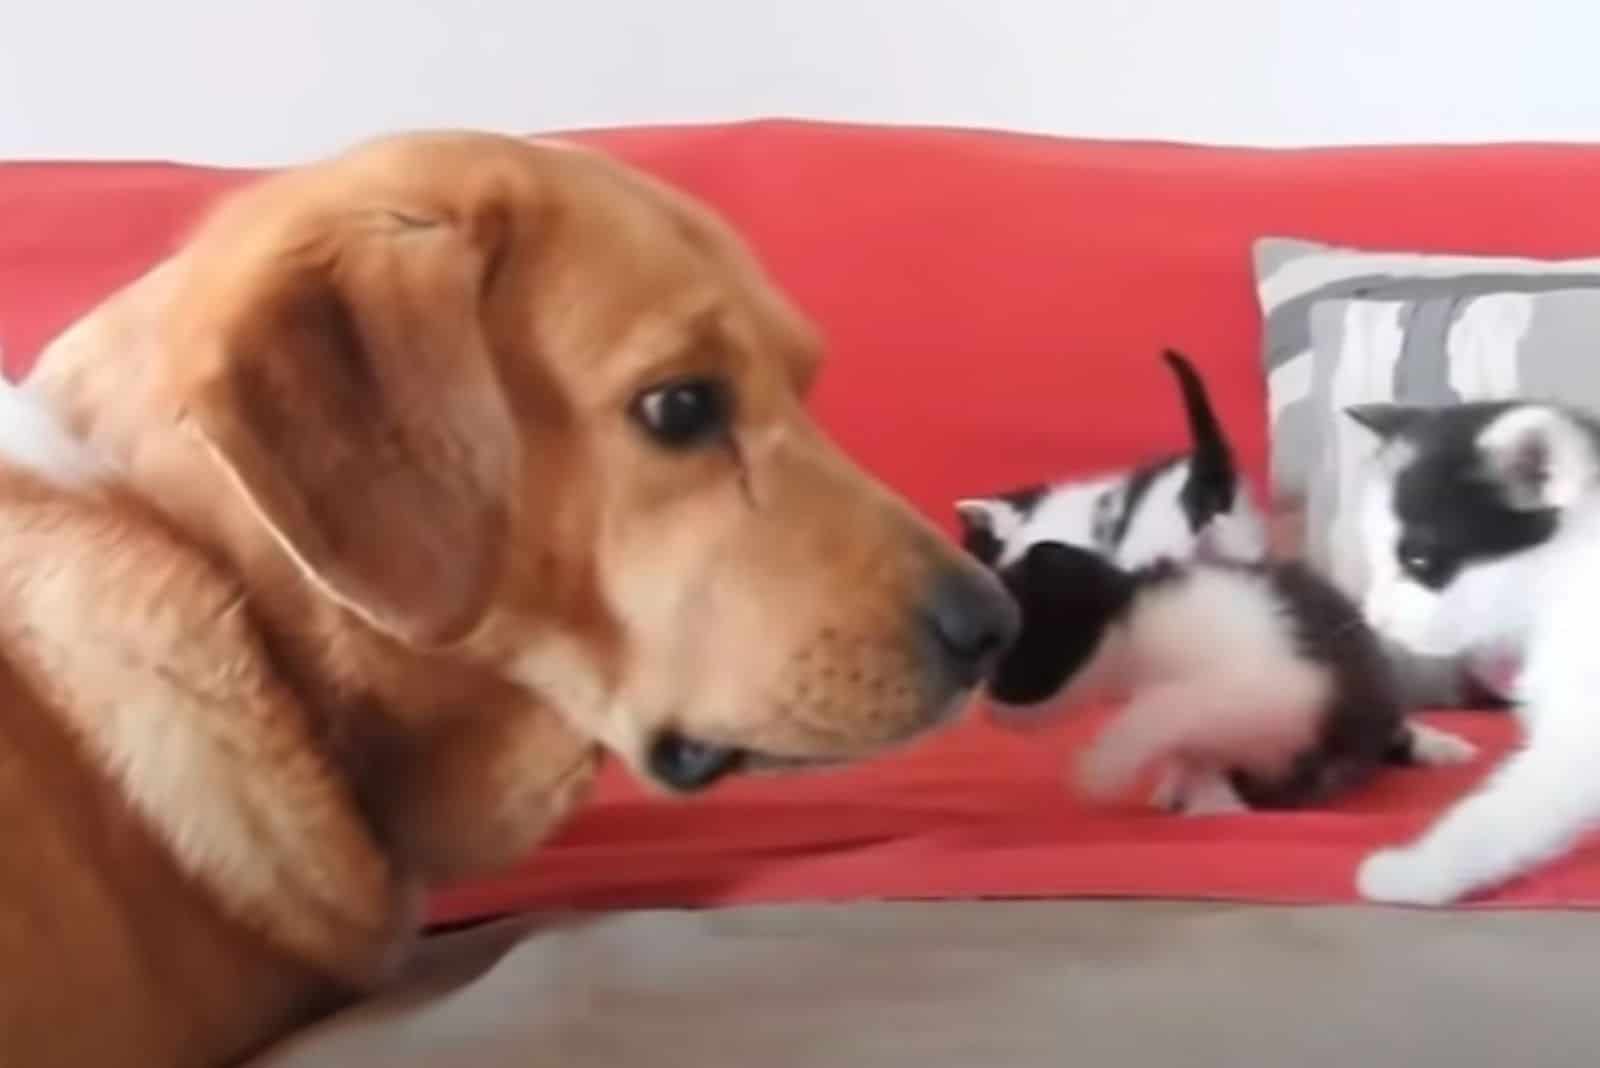 the dog looking at the rescued kittens